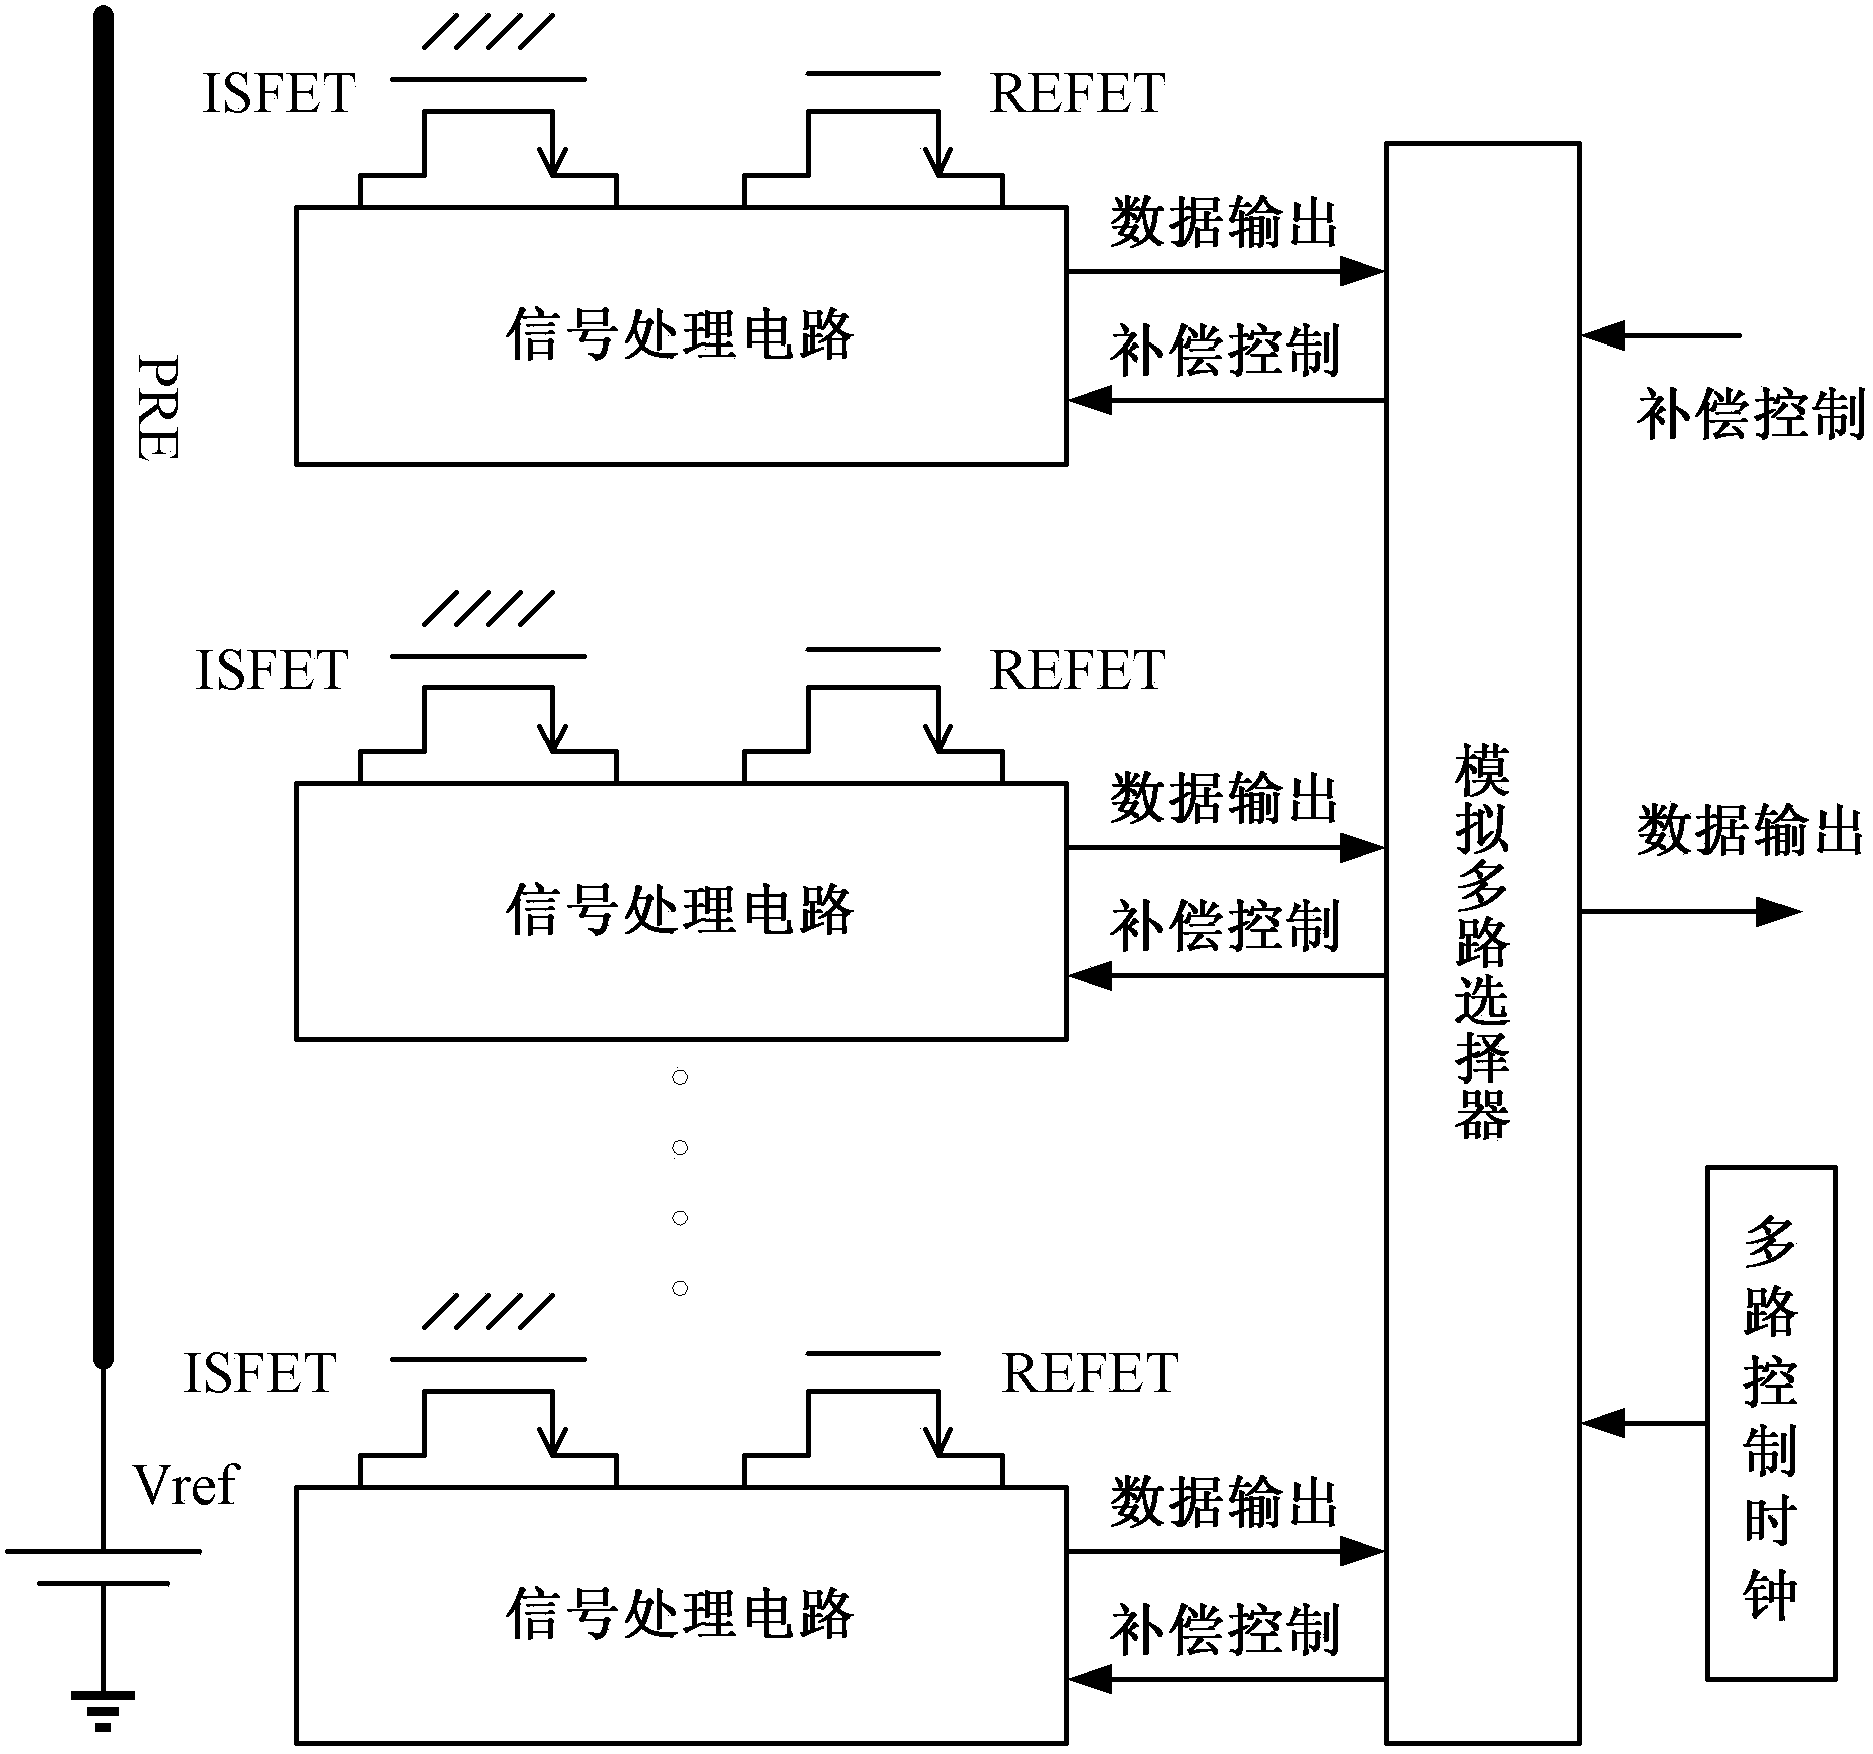 Multichannel ion sensitive field effect transistor (ISFET) sensor readout circuit with compensation function